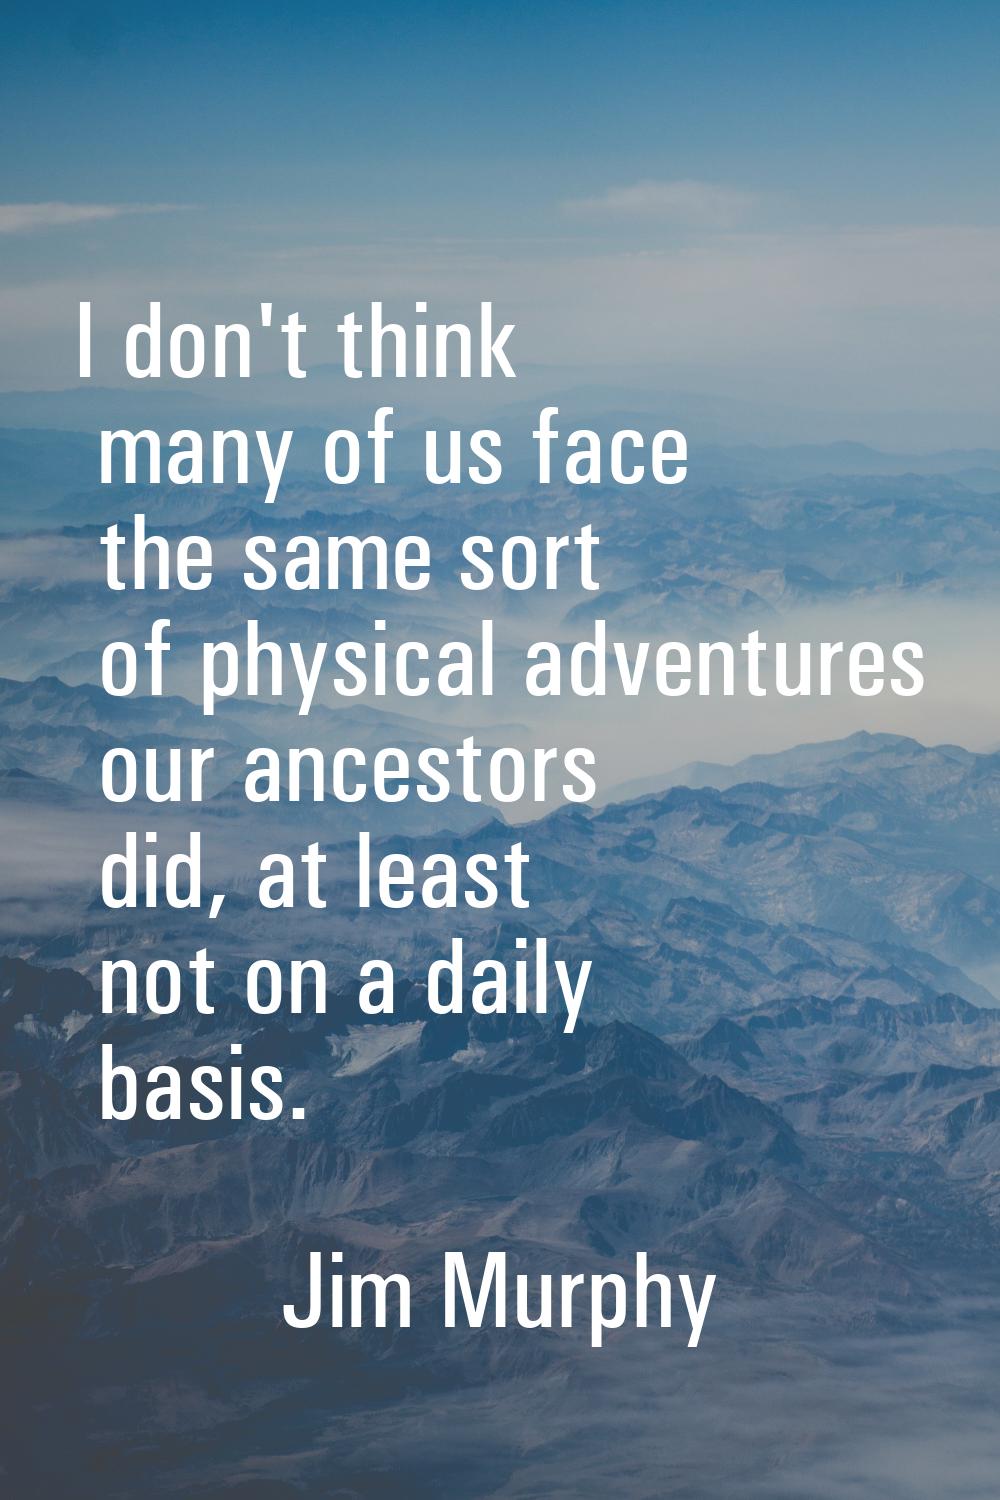 I don't think many of us face the same sort of physical adventures our ancestors did, at least not 